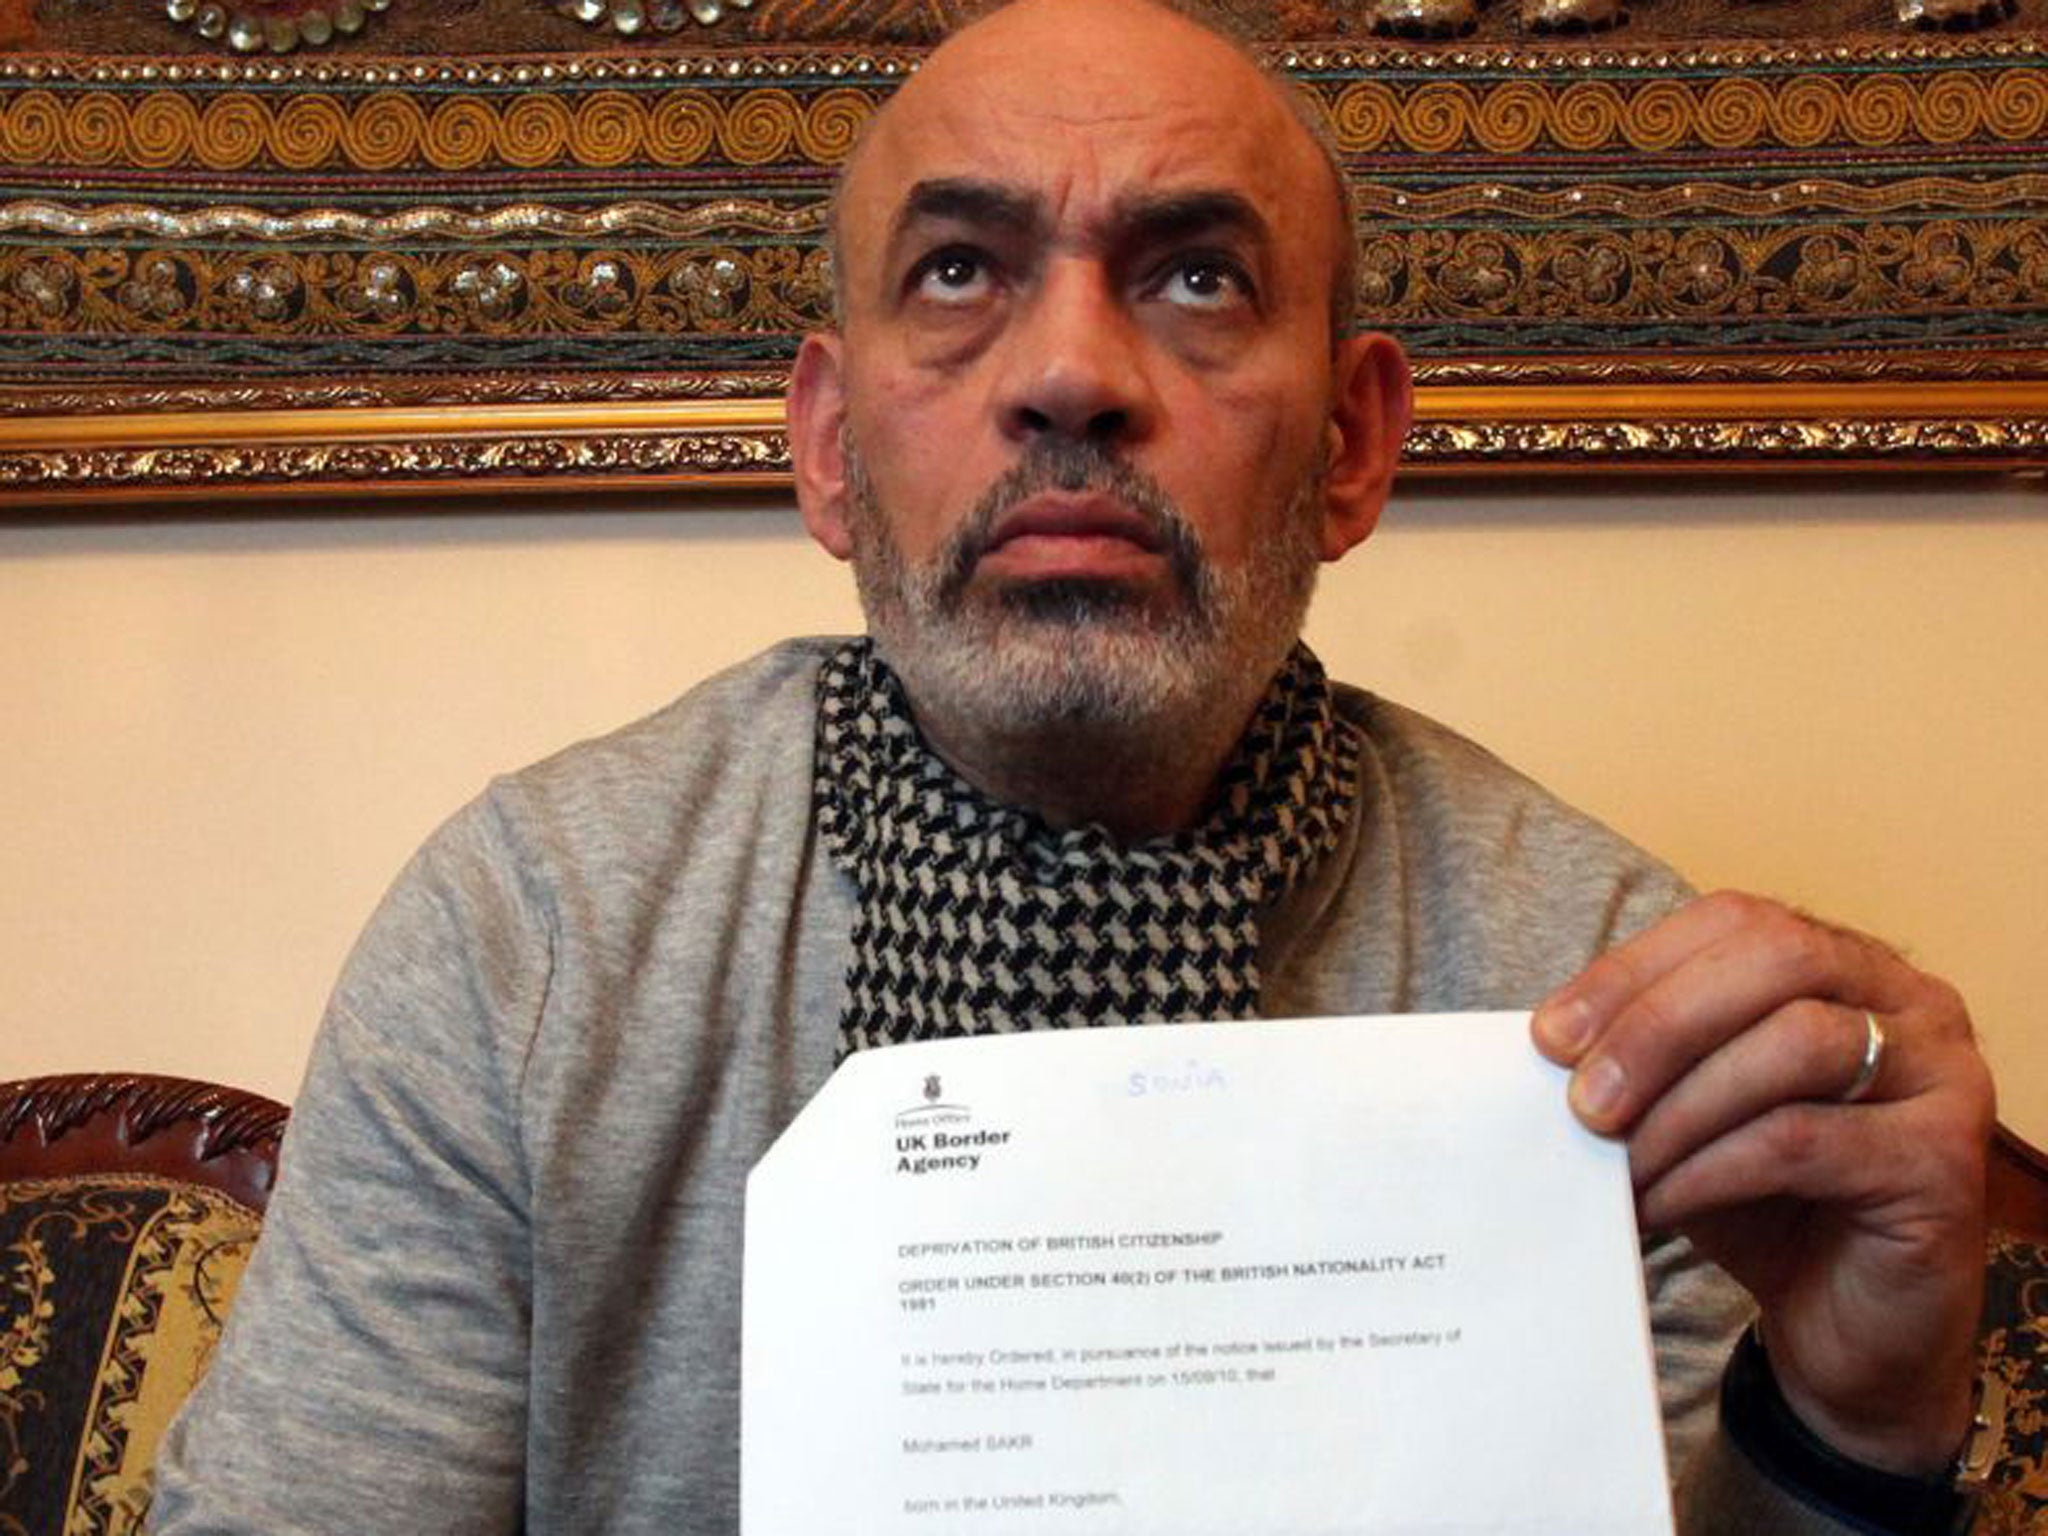 Gamal Sakr with the letter saying his son, Mohamed, had been stripped of his British citizenship